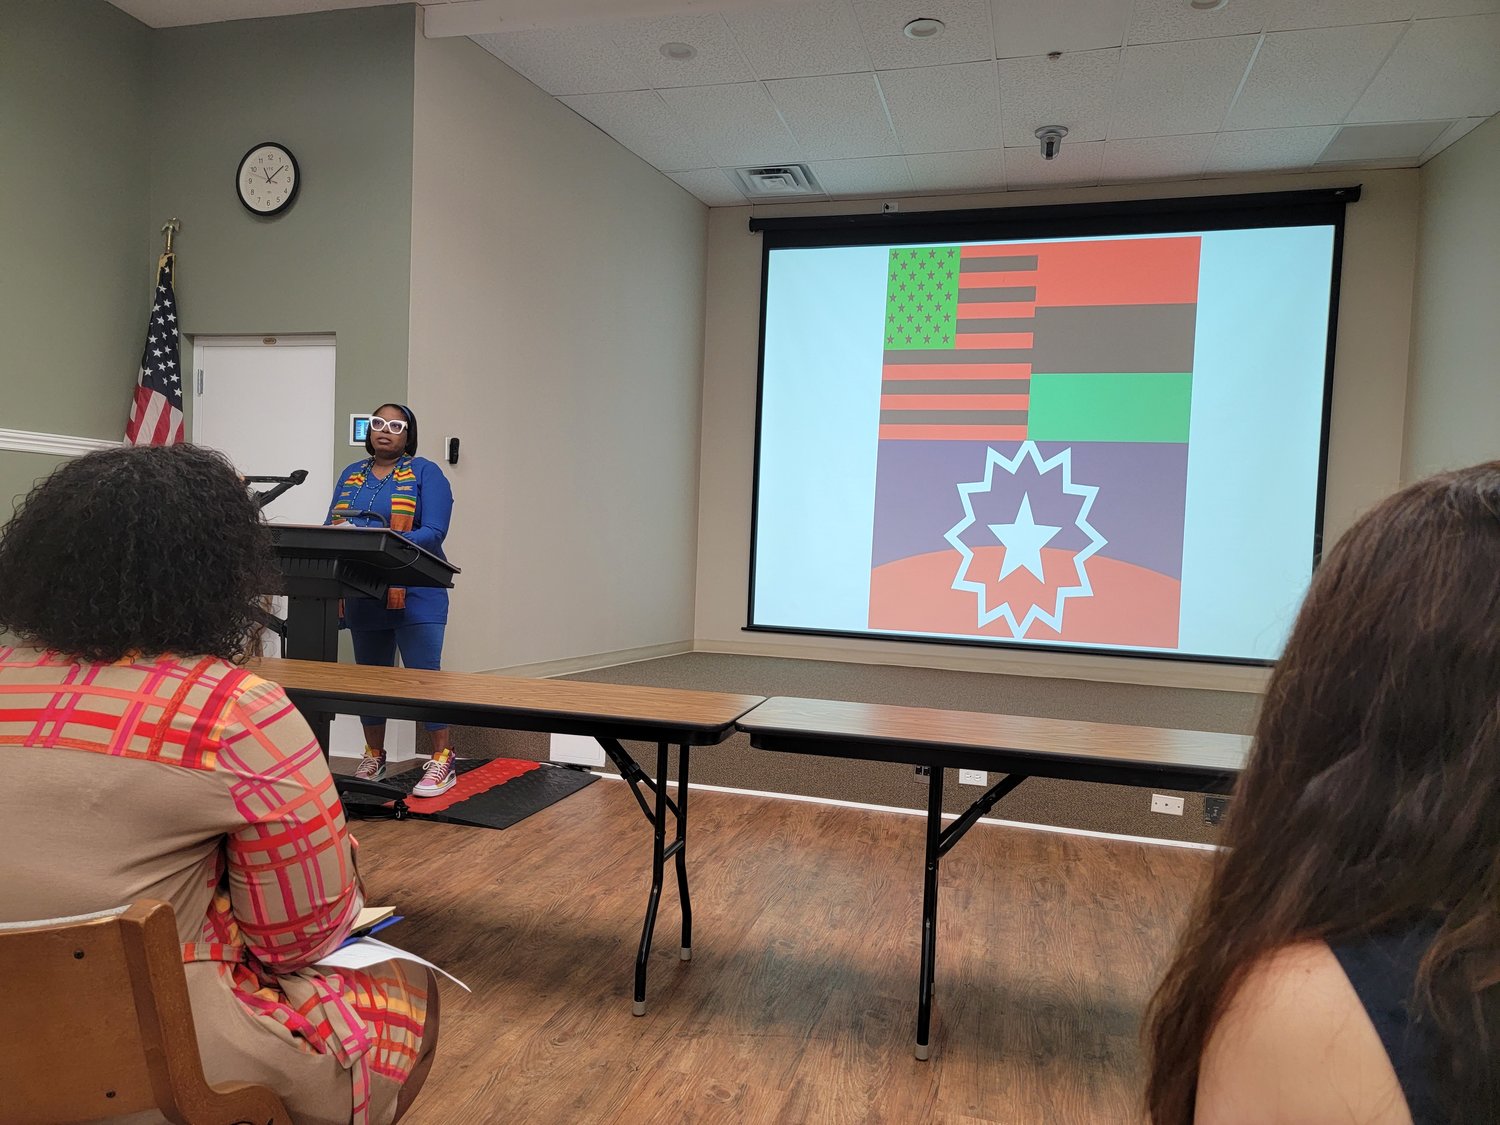 Explaining the various flag associated with the Juneteenth celebration, Dr. Grier-Key made a point to say that they are flags inspired and in connection to the American flag, not opposing stances.